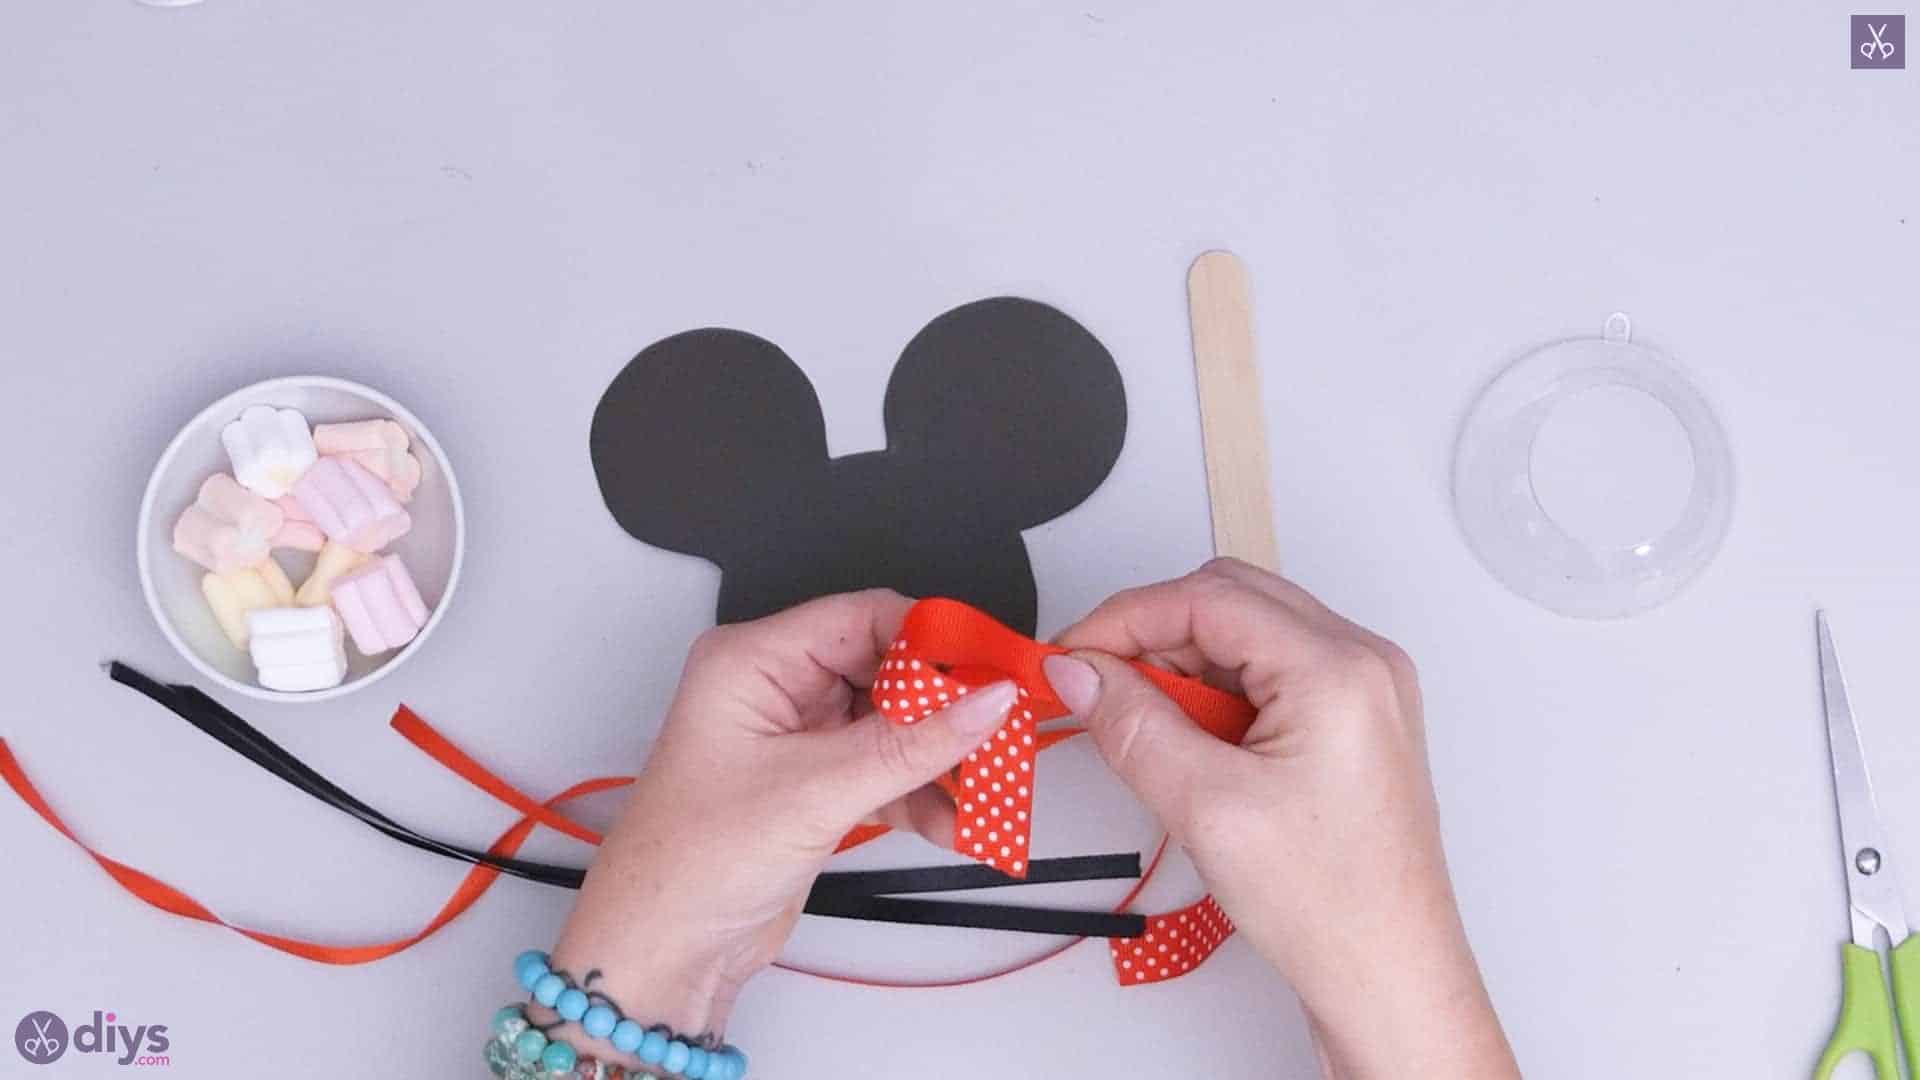 Diy minnie mouse candy holder step 3a